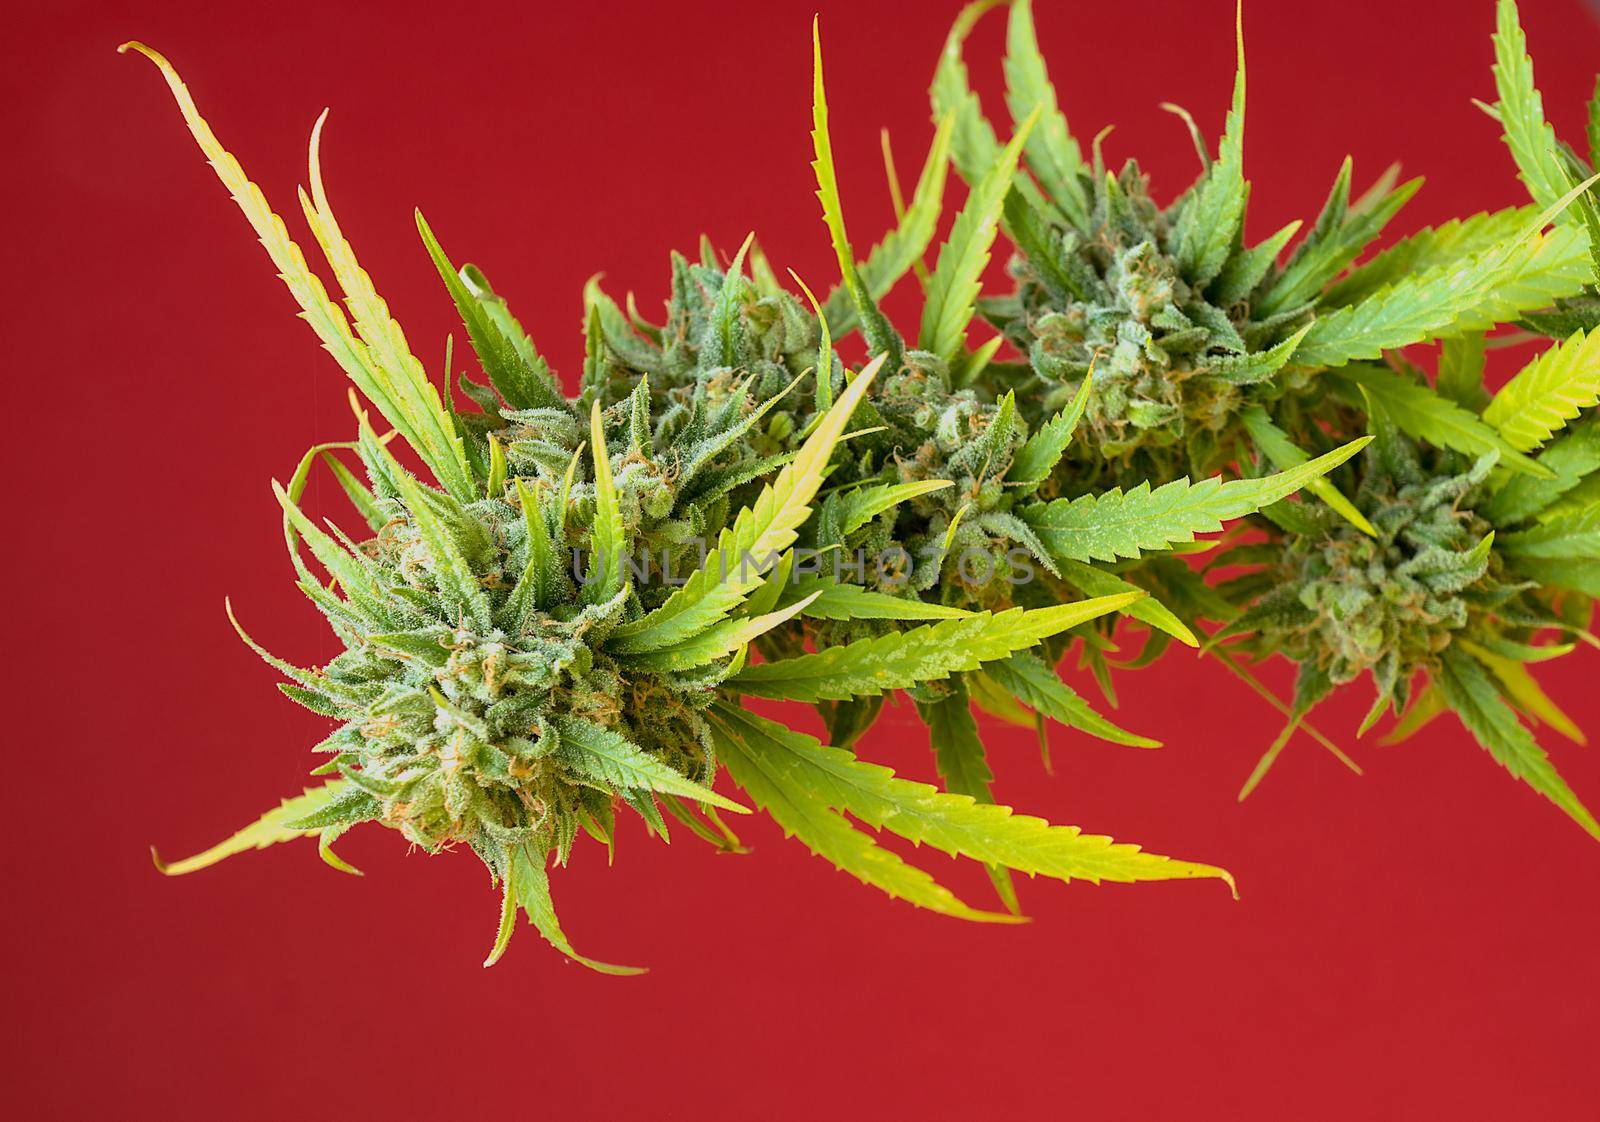 Detail horizontal image of cannabis plant with buds on red background and soft side lighting